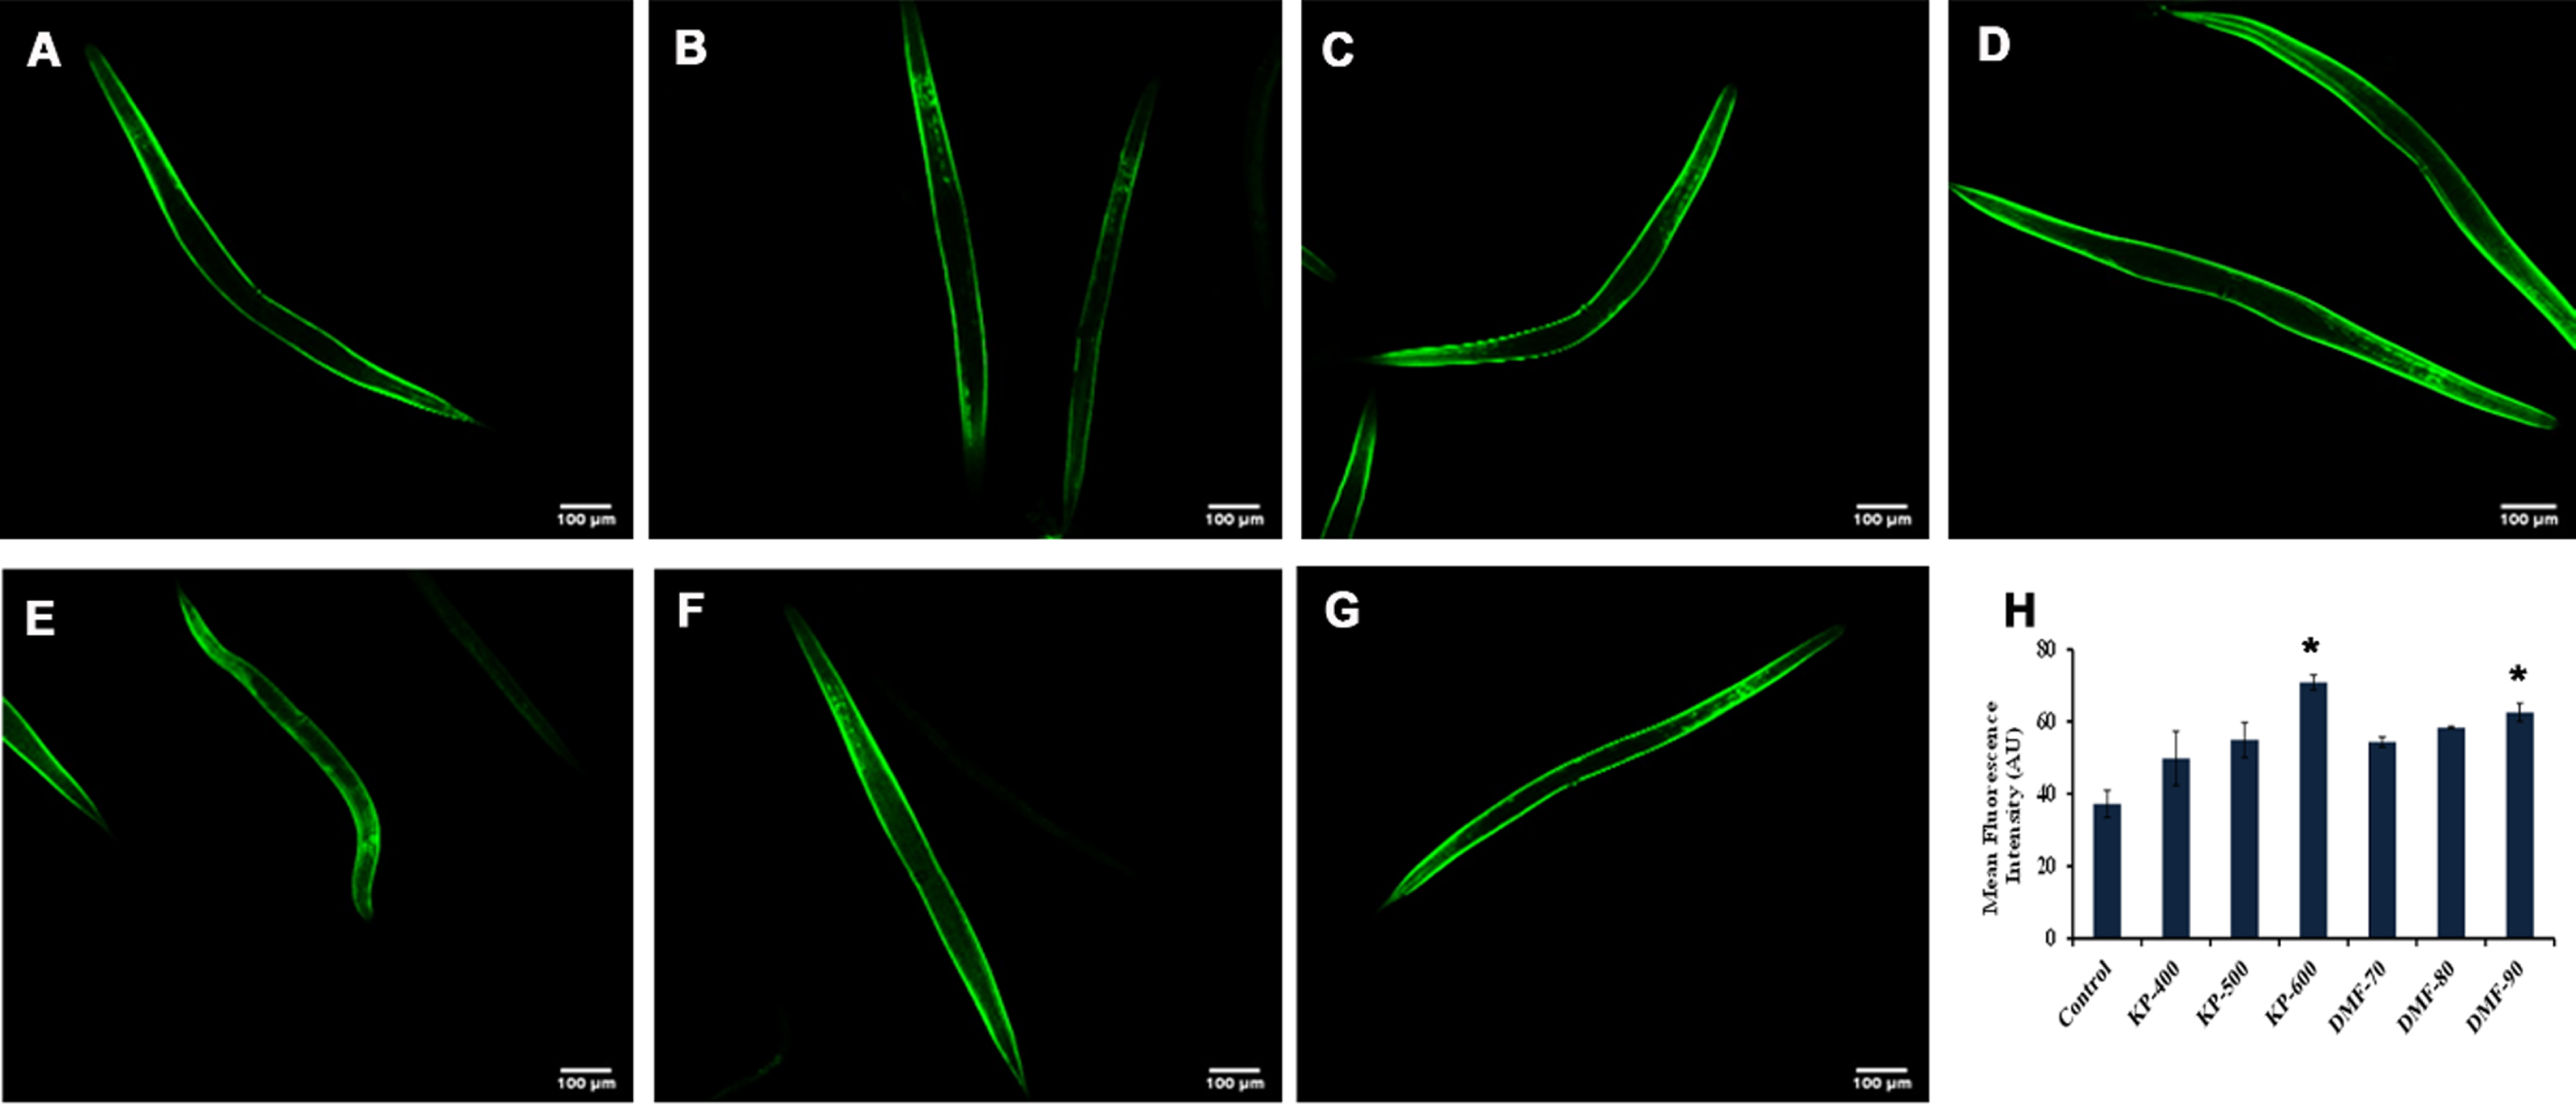 KP and DMF could activate SKN-1 in LG333 transgenic strain (A) Control (B –D) KP (400 –600μg/ml) wherein 600μg/ml showing significance (p <  0.05) (E –G) DMF (70 –90μM) wherein 90μM showing significance (p <  0.05) (H) Quantification of SKN-1 fluorescence intensity of LG333 transgenic worms upon treatment with KP (400 –600μg/ml) and DMF (70 –90μM) (* represents significance at p <  0.05; n = 10).